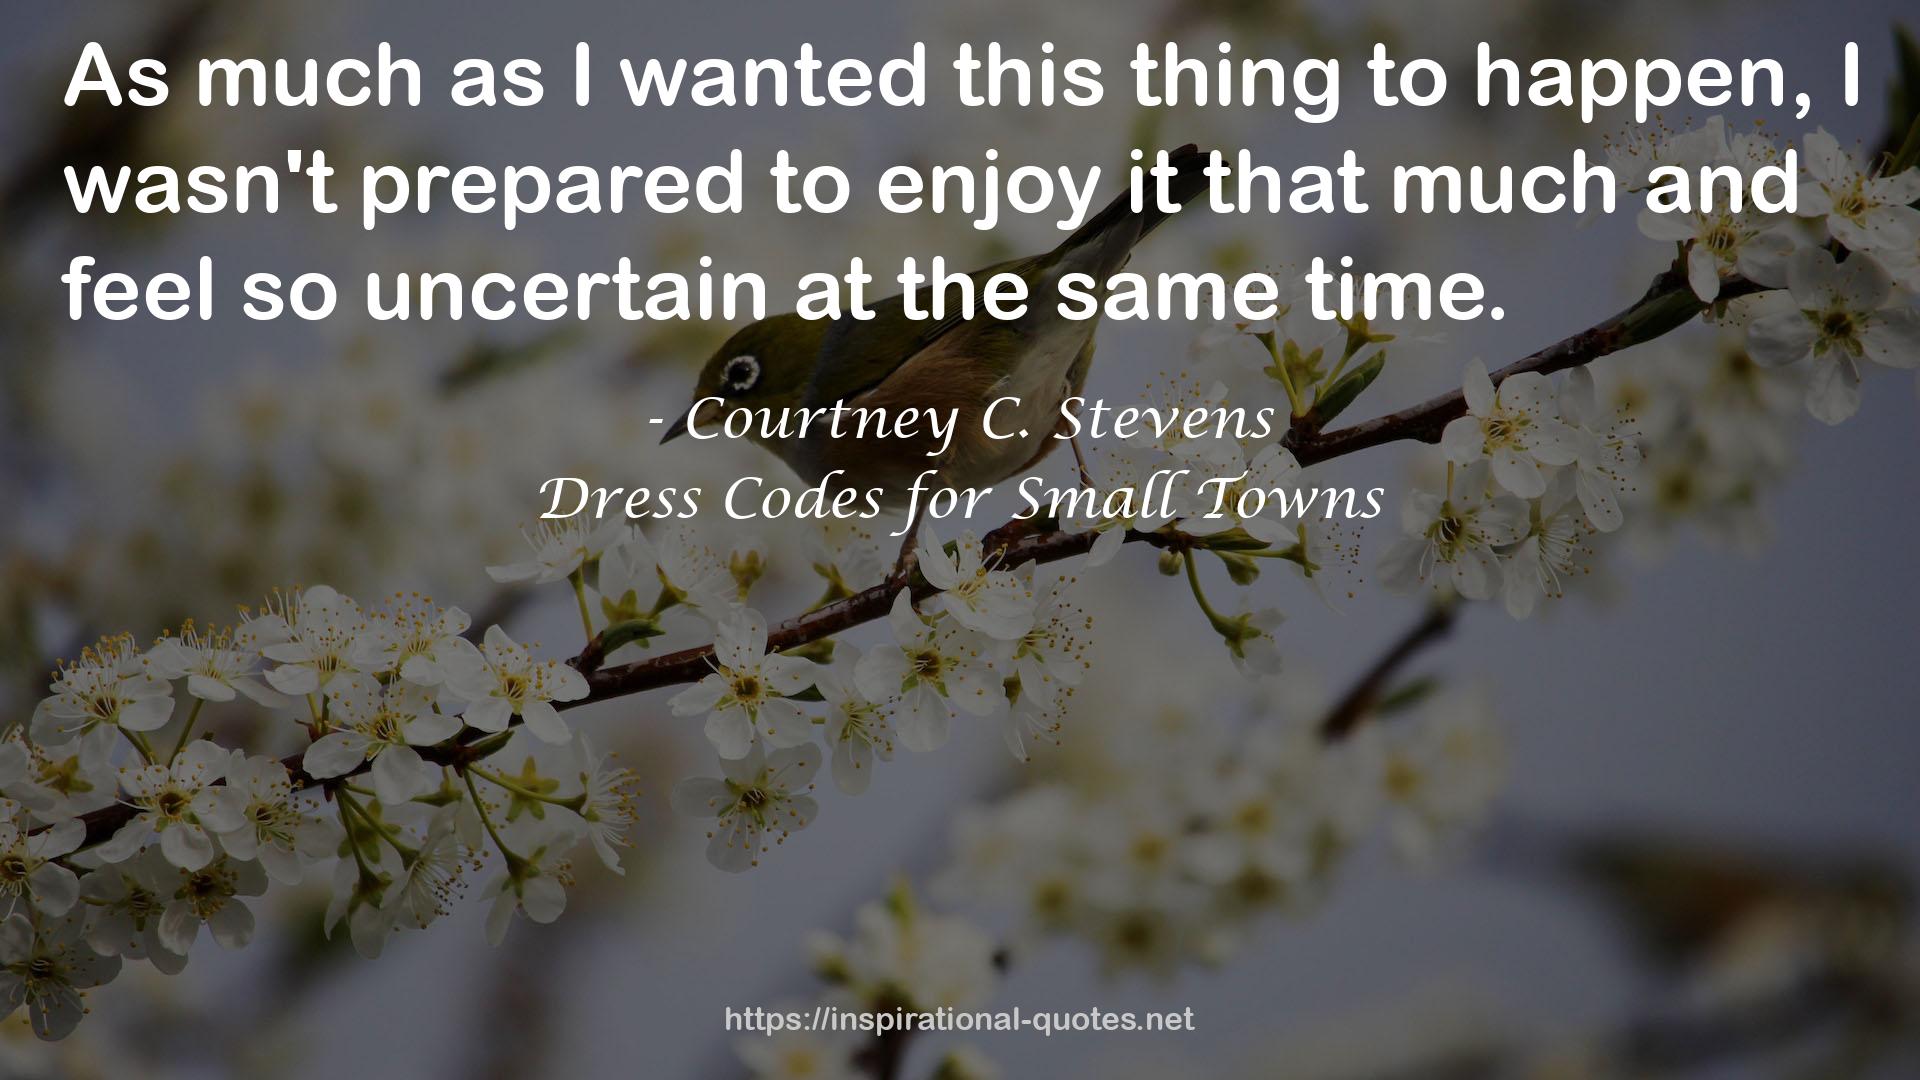 Dress Codes for Small Towns QUOTES